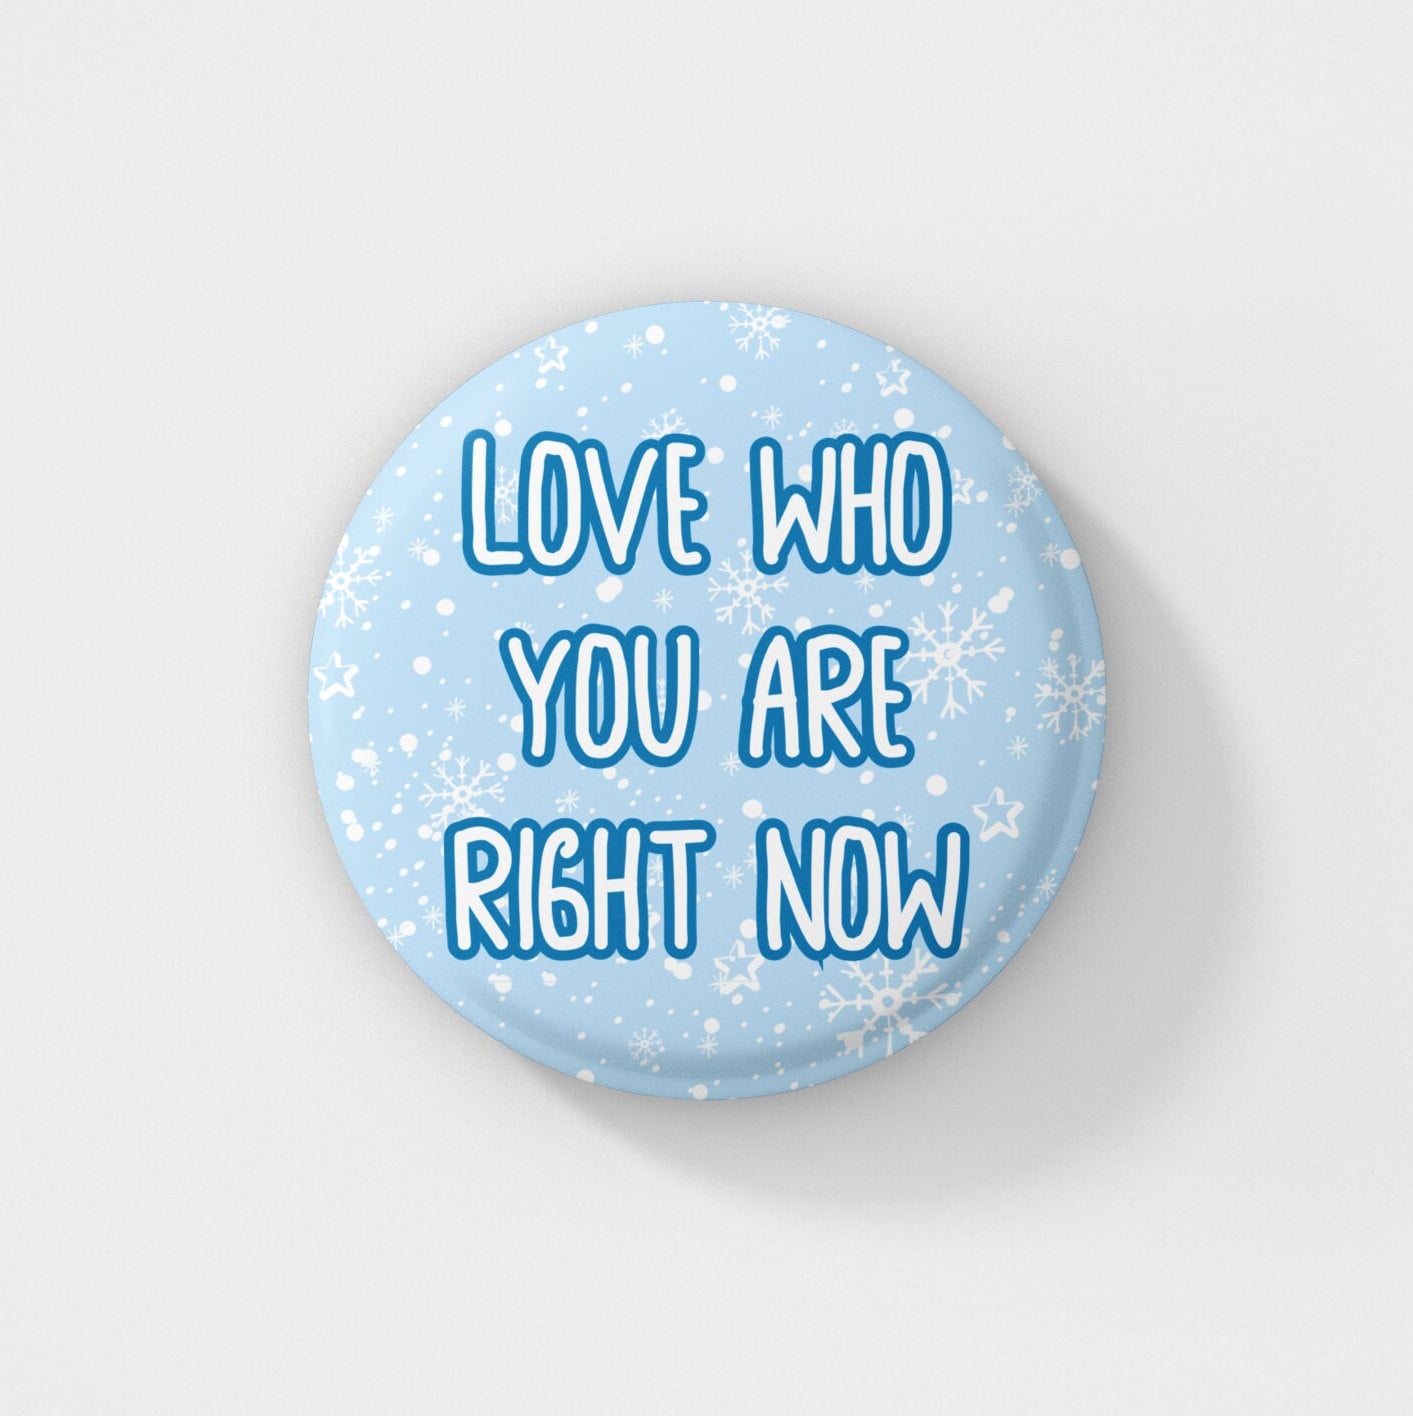 Love Who You Are Right Now - Pin Badge | Self Care Gifts, Friendship, Love Yourself